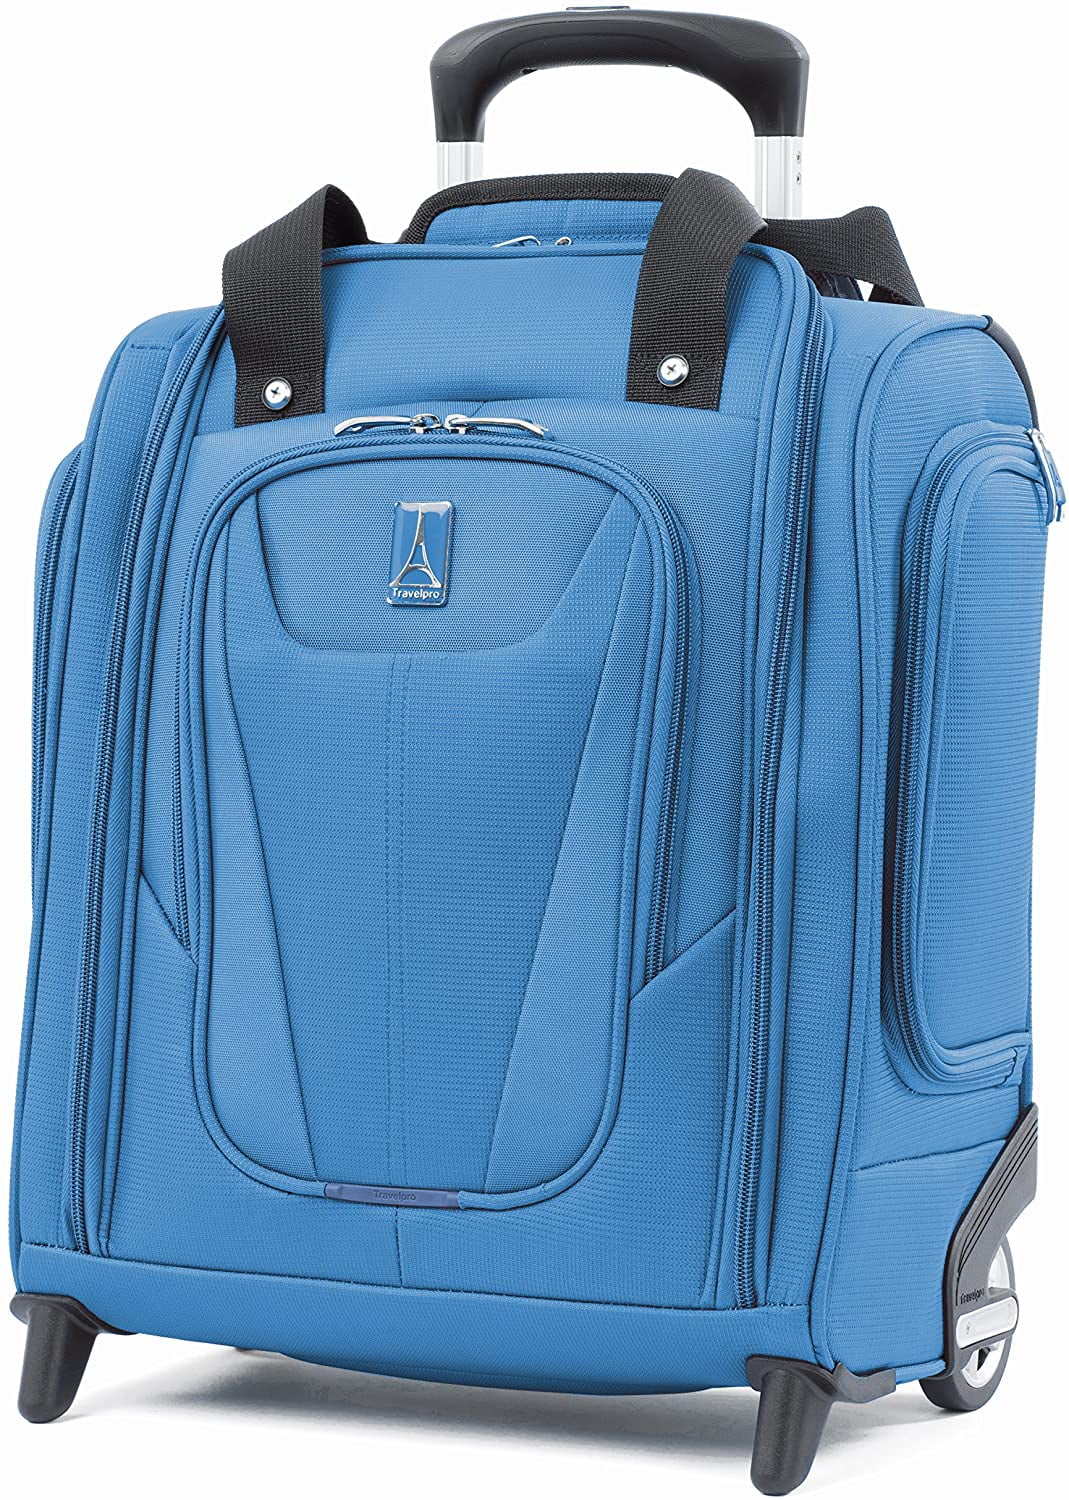 Azure Blue Travelpro Maxlite 5 Carry-On Rolling Duffel Bag 20-Inch